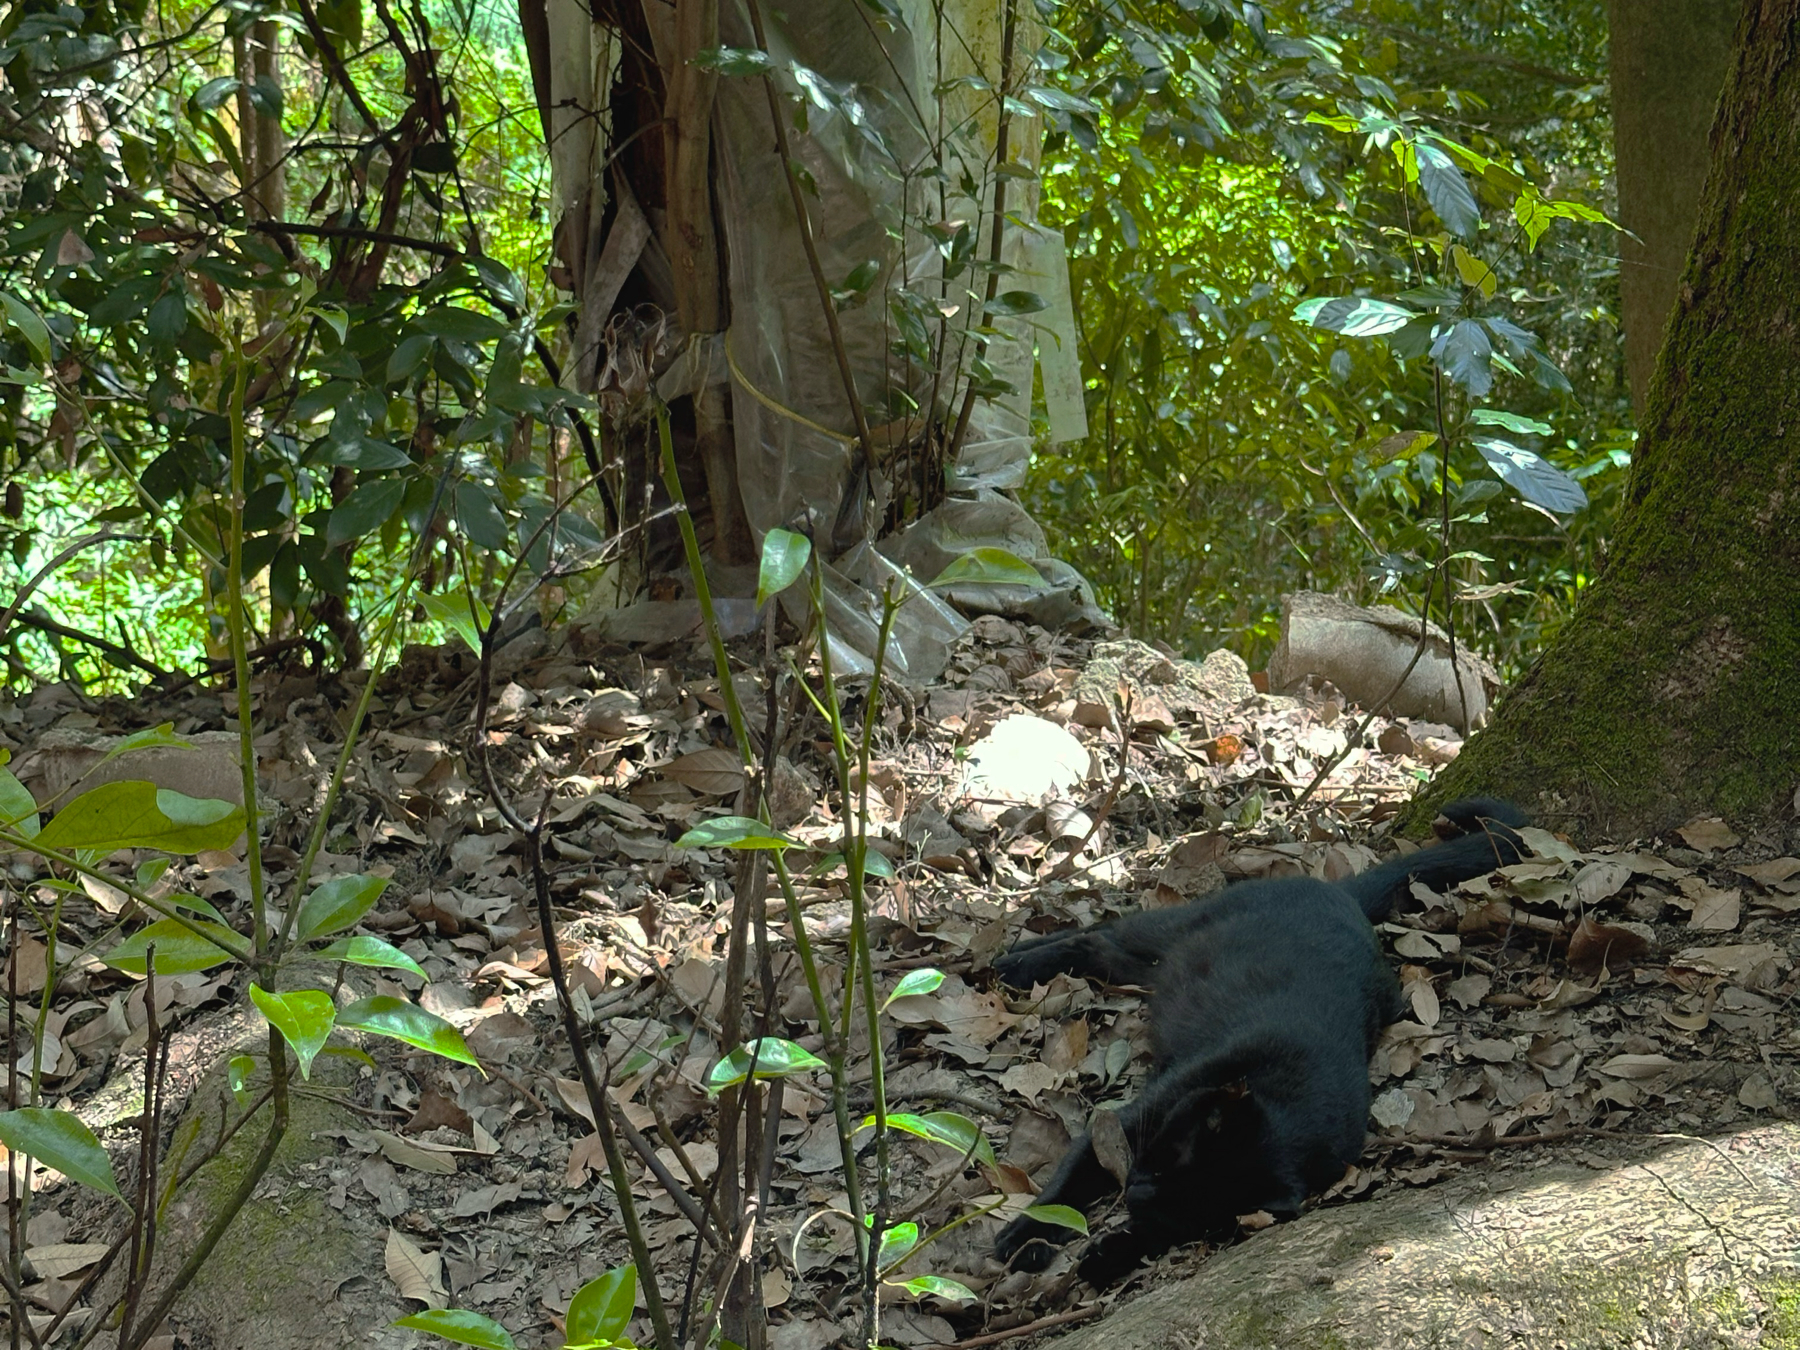 A black feral cat lying on the forest floor among dried leaves, next to a tree trunk, in a shaded woodland area.